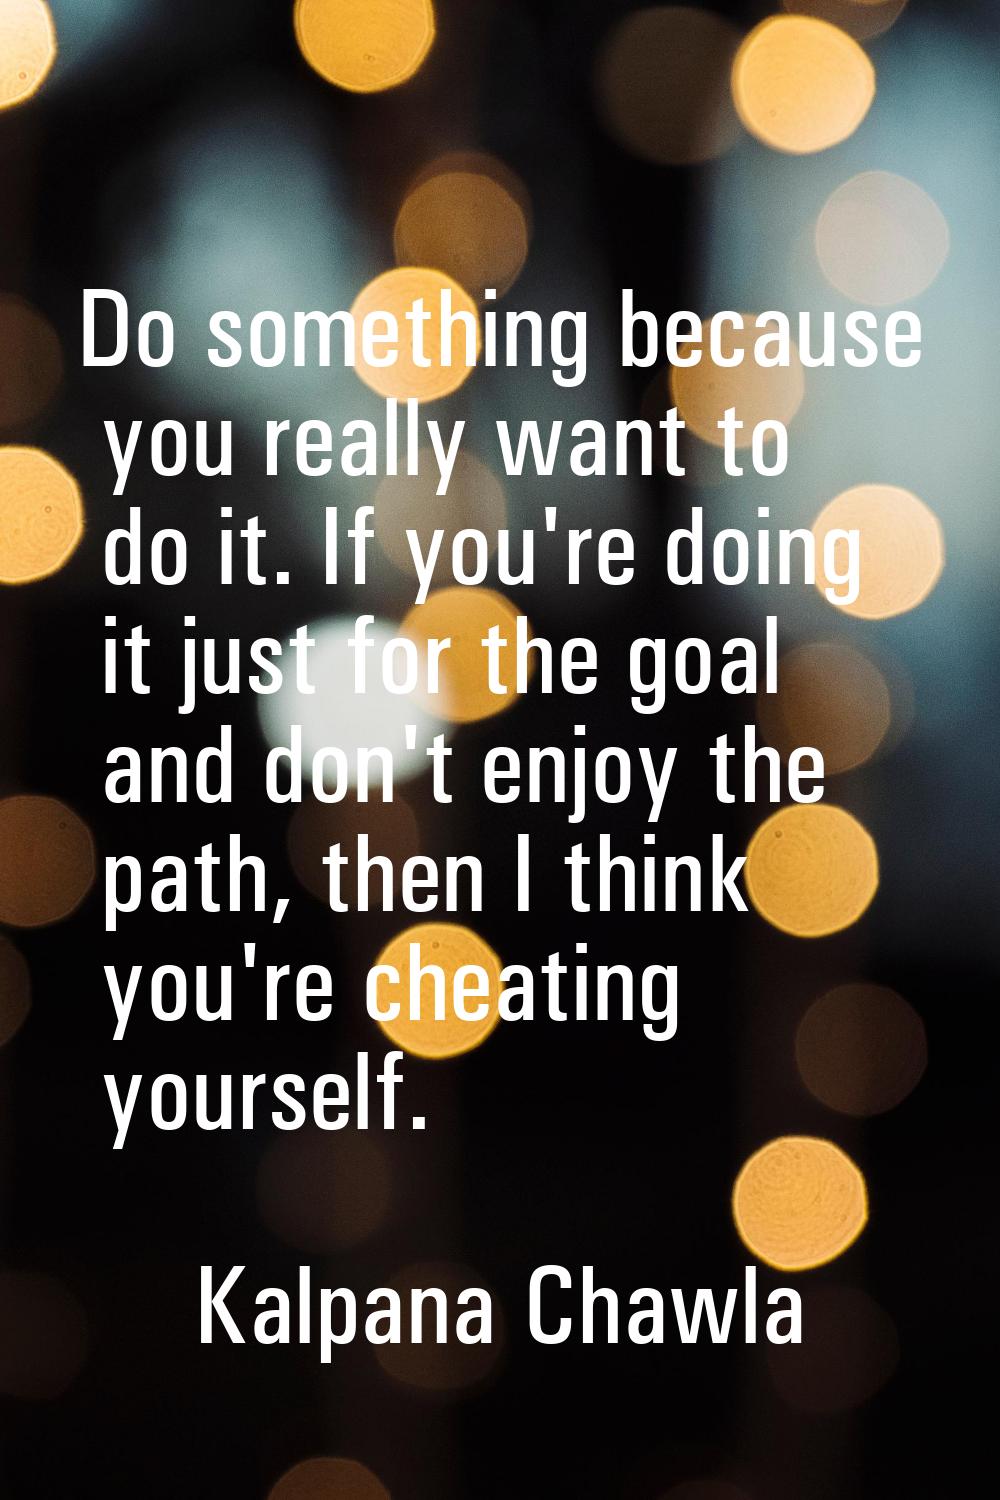 Do something because you really want to do it. If you're doing it just for the goal and don't enjoy